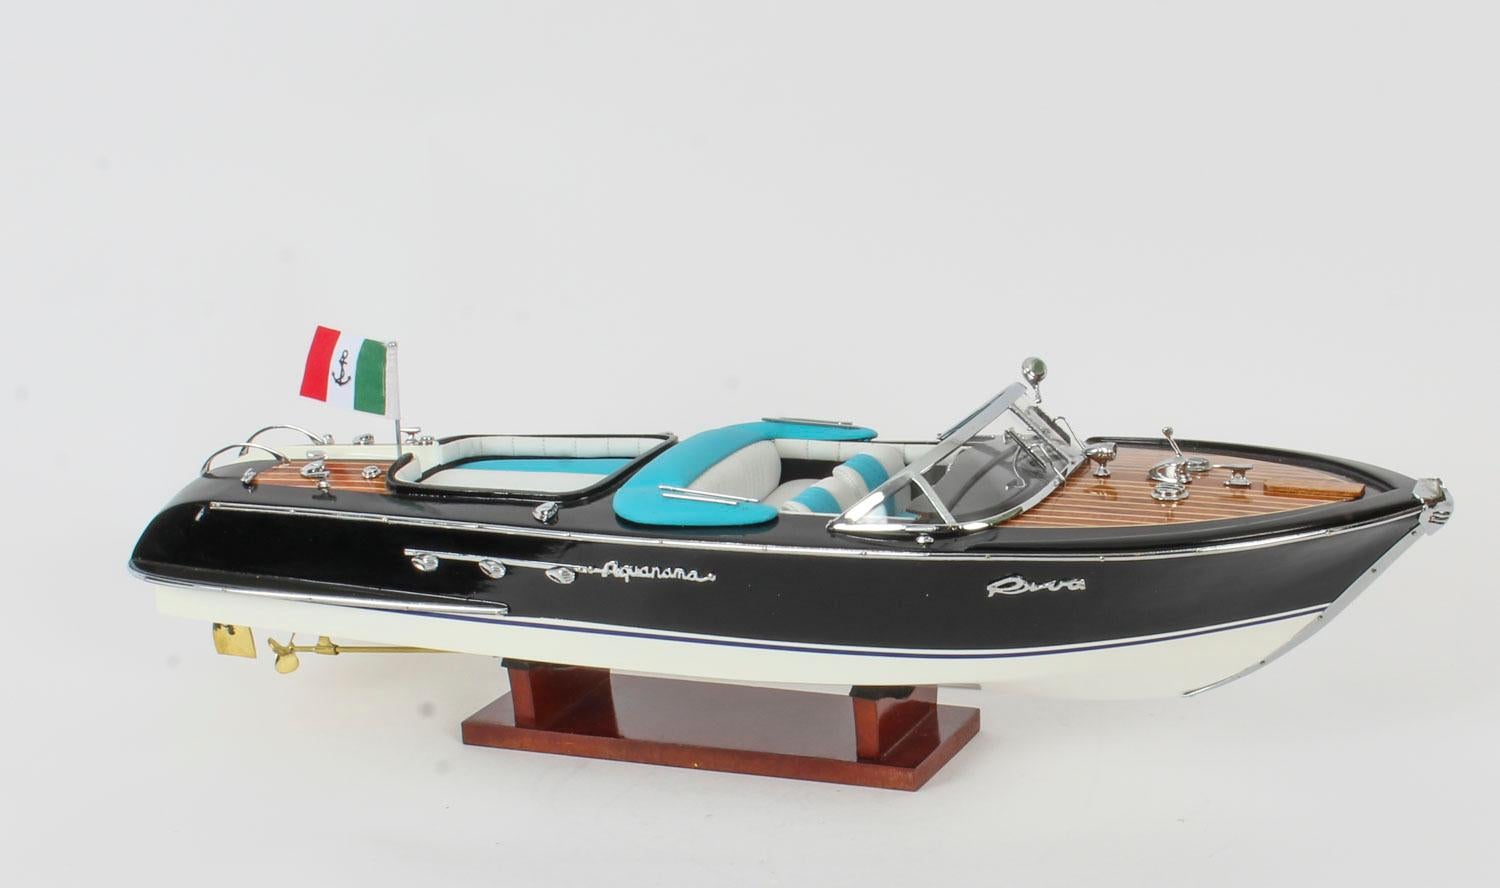 This is an exceptional handbuilt model of the “Riva Aquarama”, a luxury wooden launch built by the Italian yactbuilder Riva and late 20th century in date.
In production from 1962-1996, the Aquarama was the most famous of Carlo Riva’s luxury designs